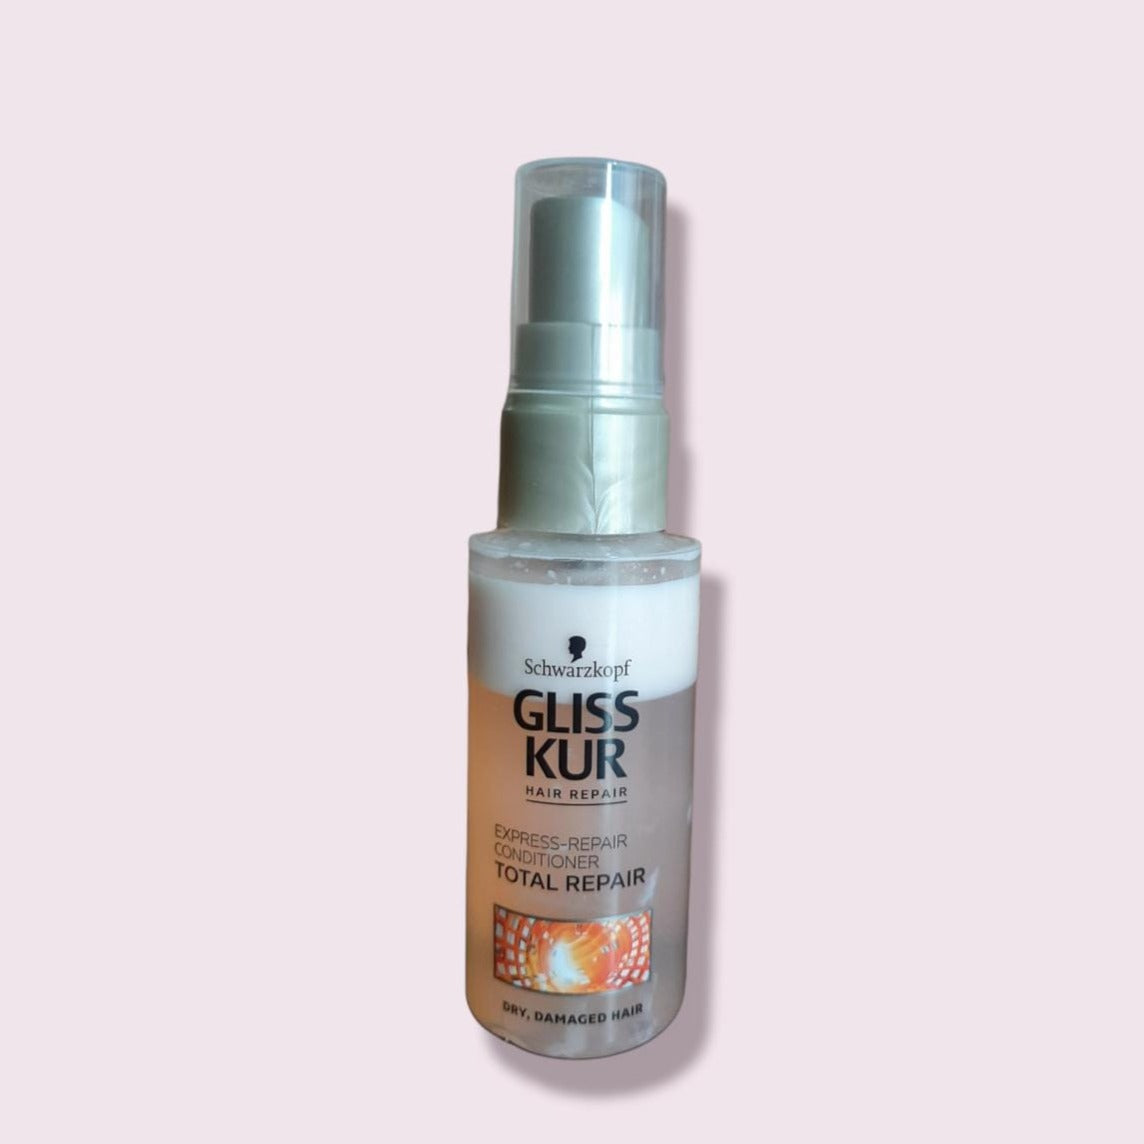 Mini glisskur for dry and damaged hair